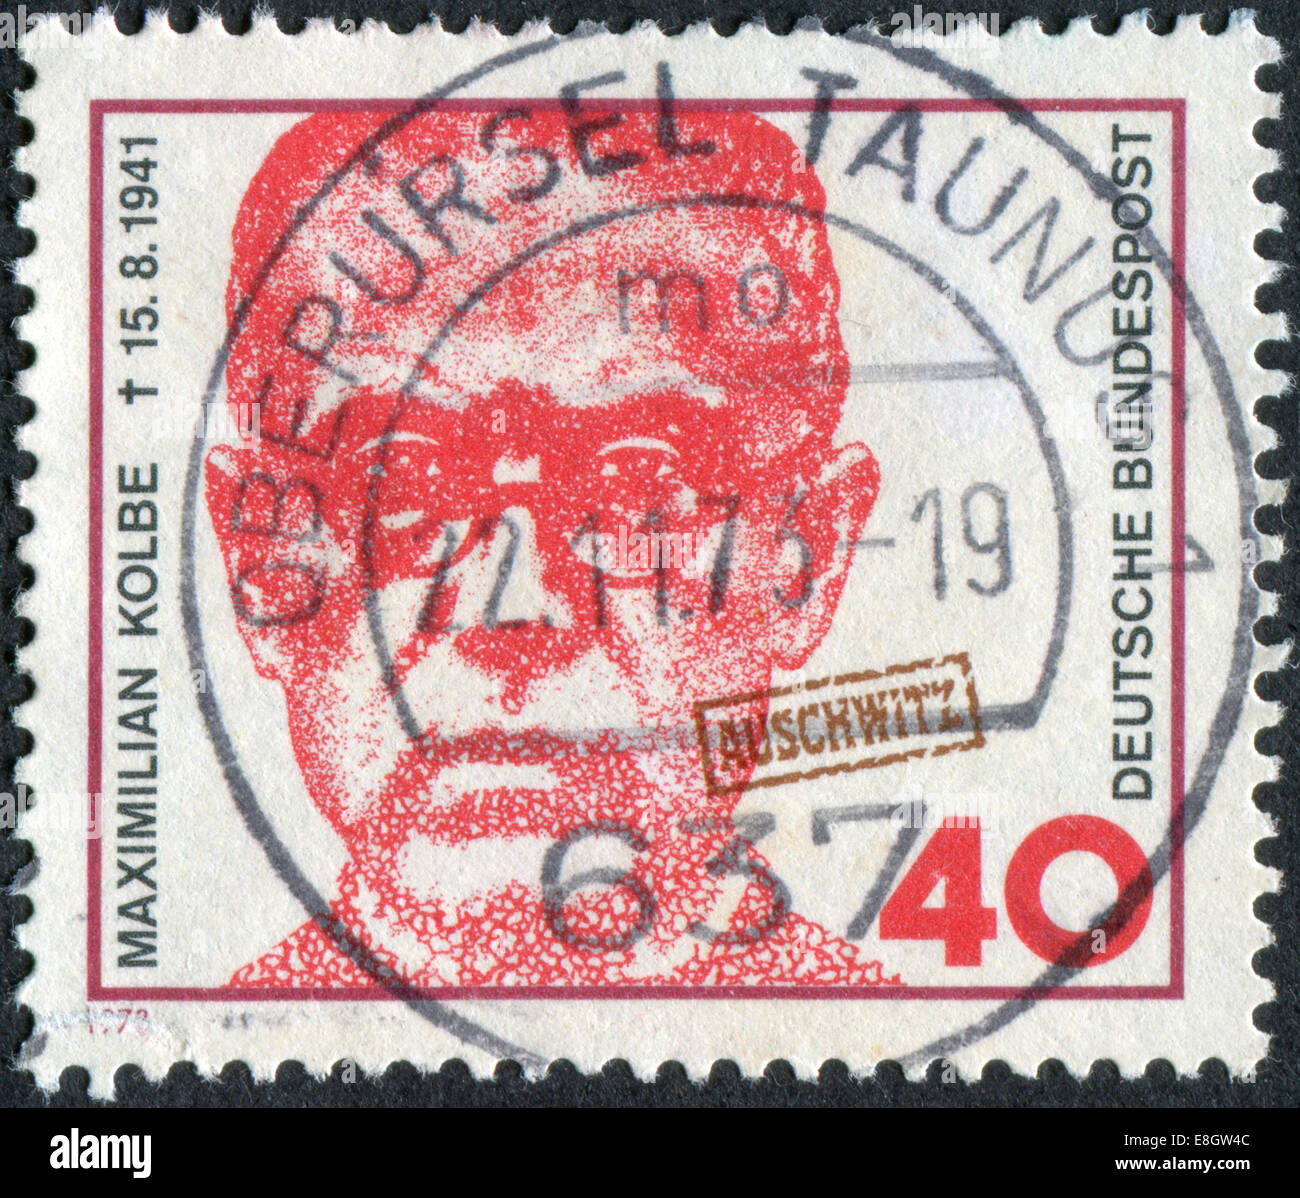 Postage stamp printed in Germany, shows the Maximilian Kolbe, Polish priest who died in Auschwitz and was beatified in 1971 Stock Photo